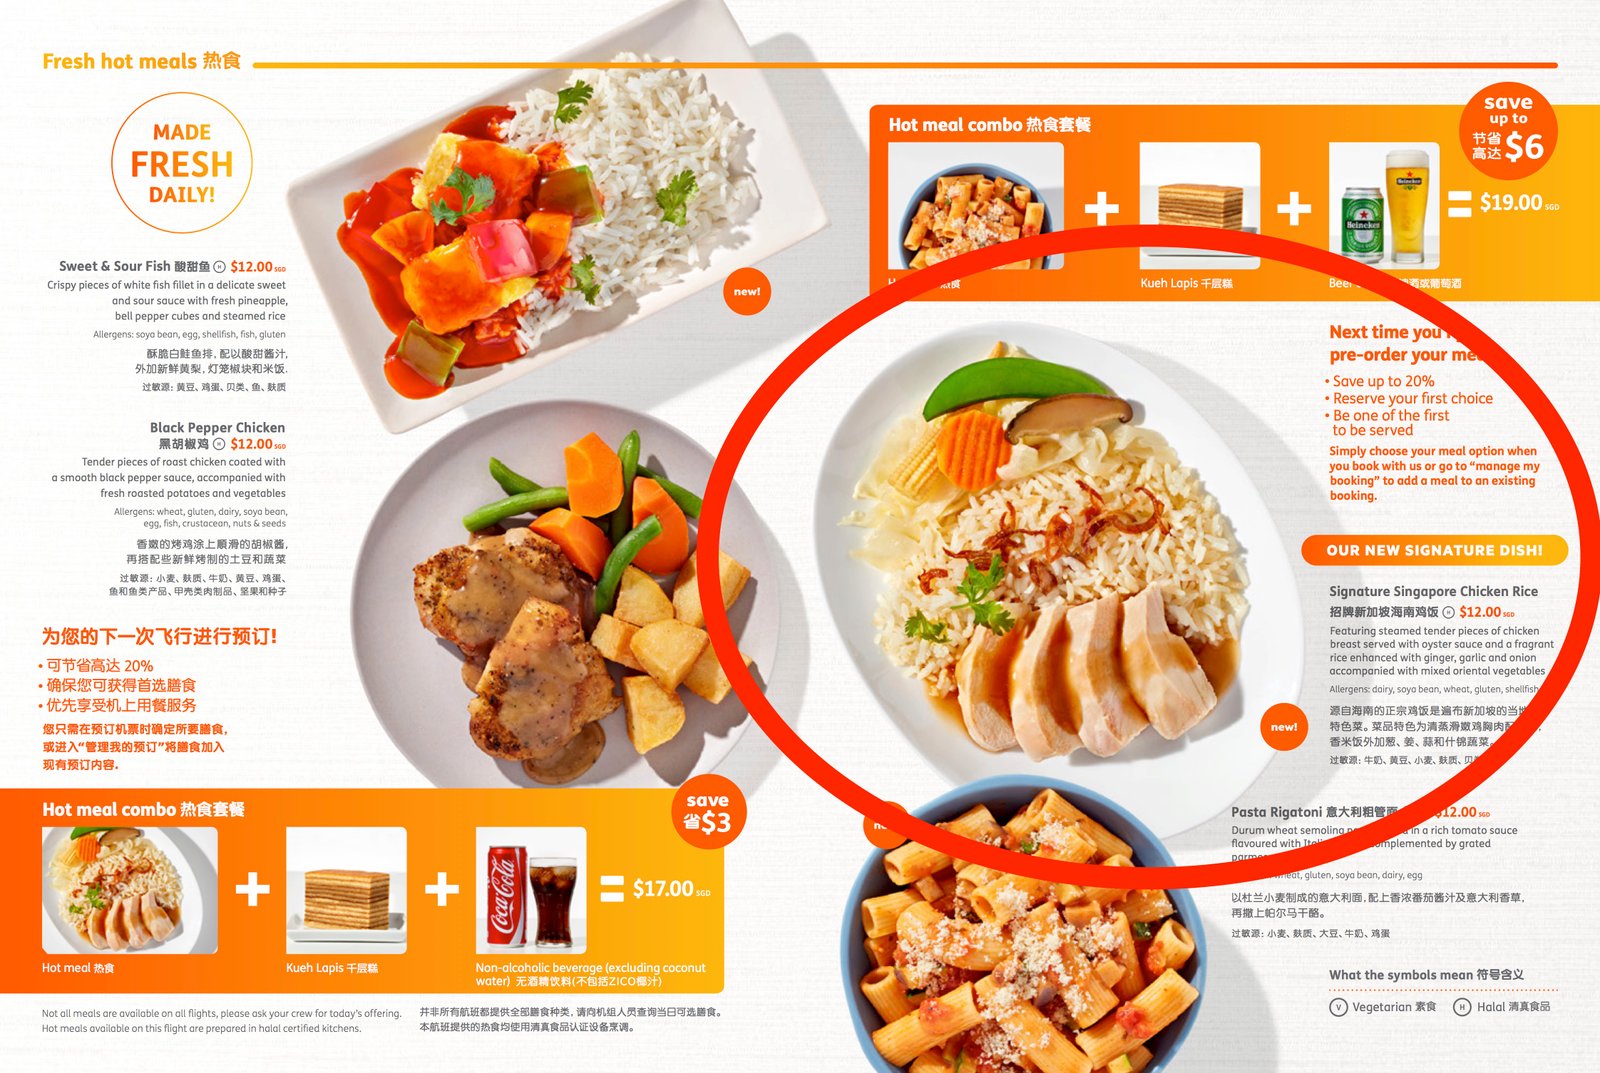 Singapore Airlines to Serve Local Meals Similiar to Jetstar and AirAsia